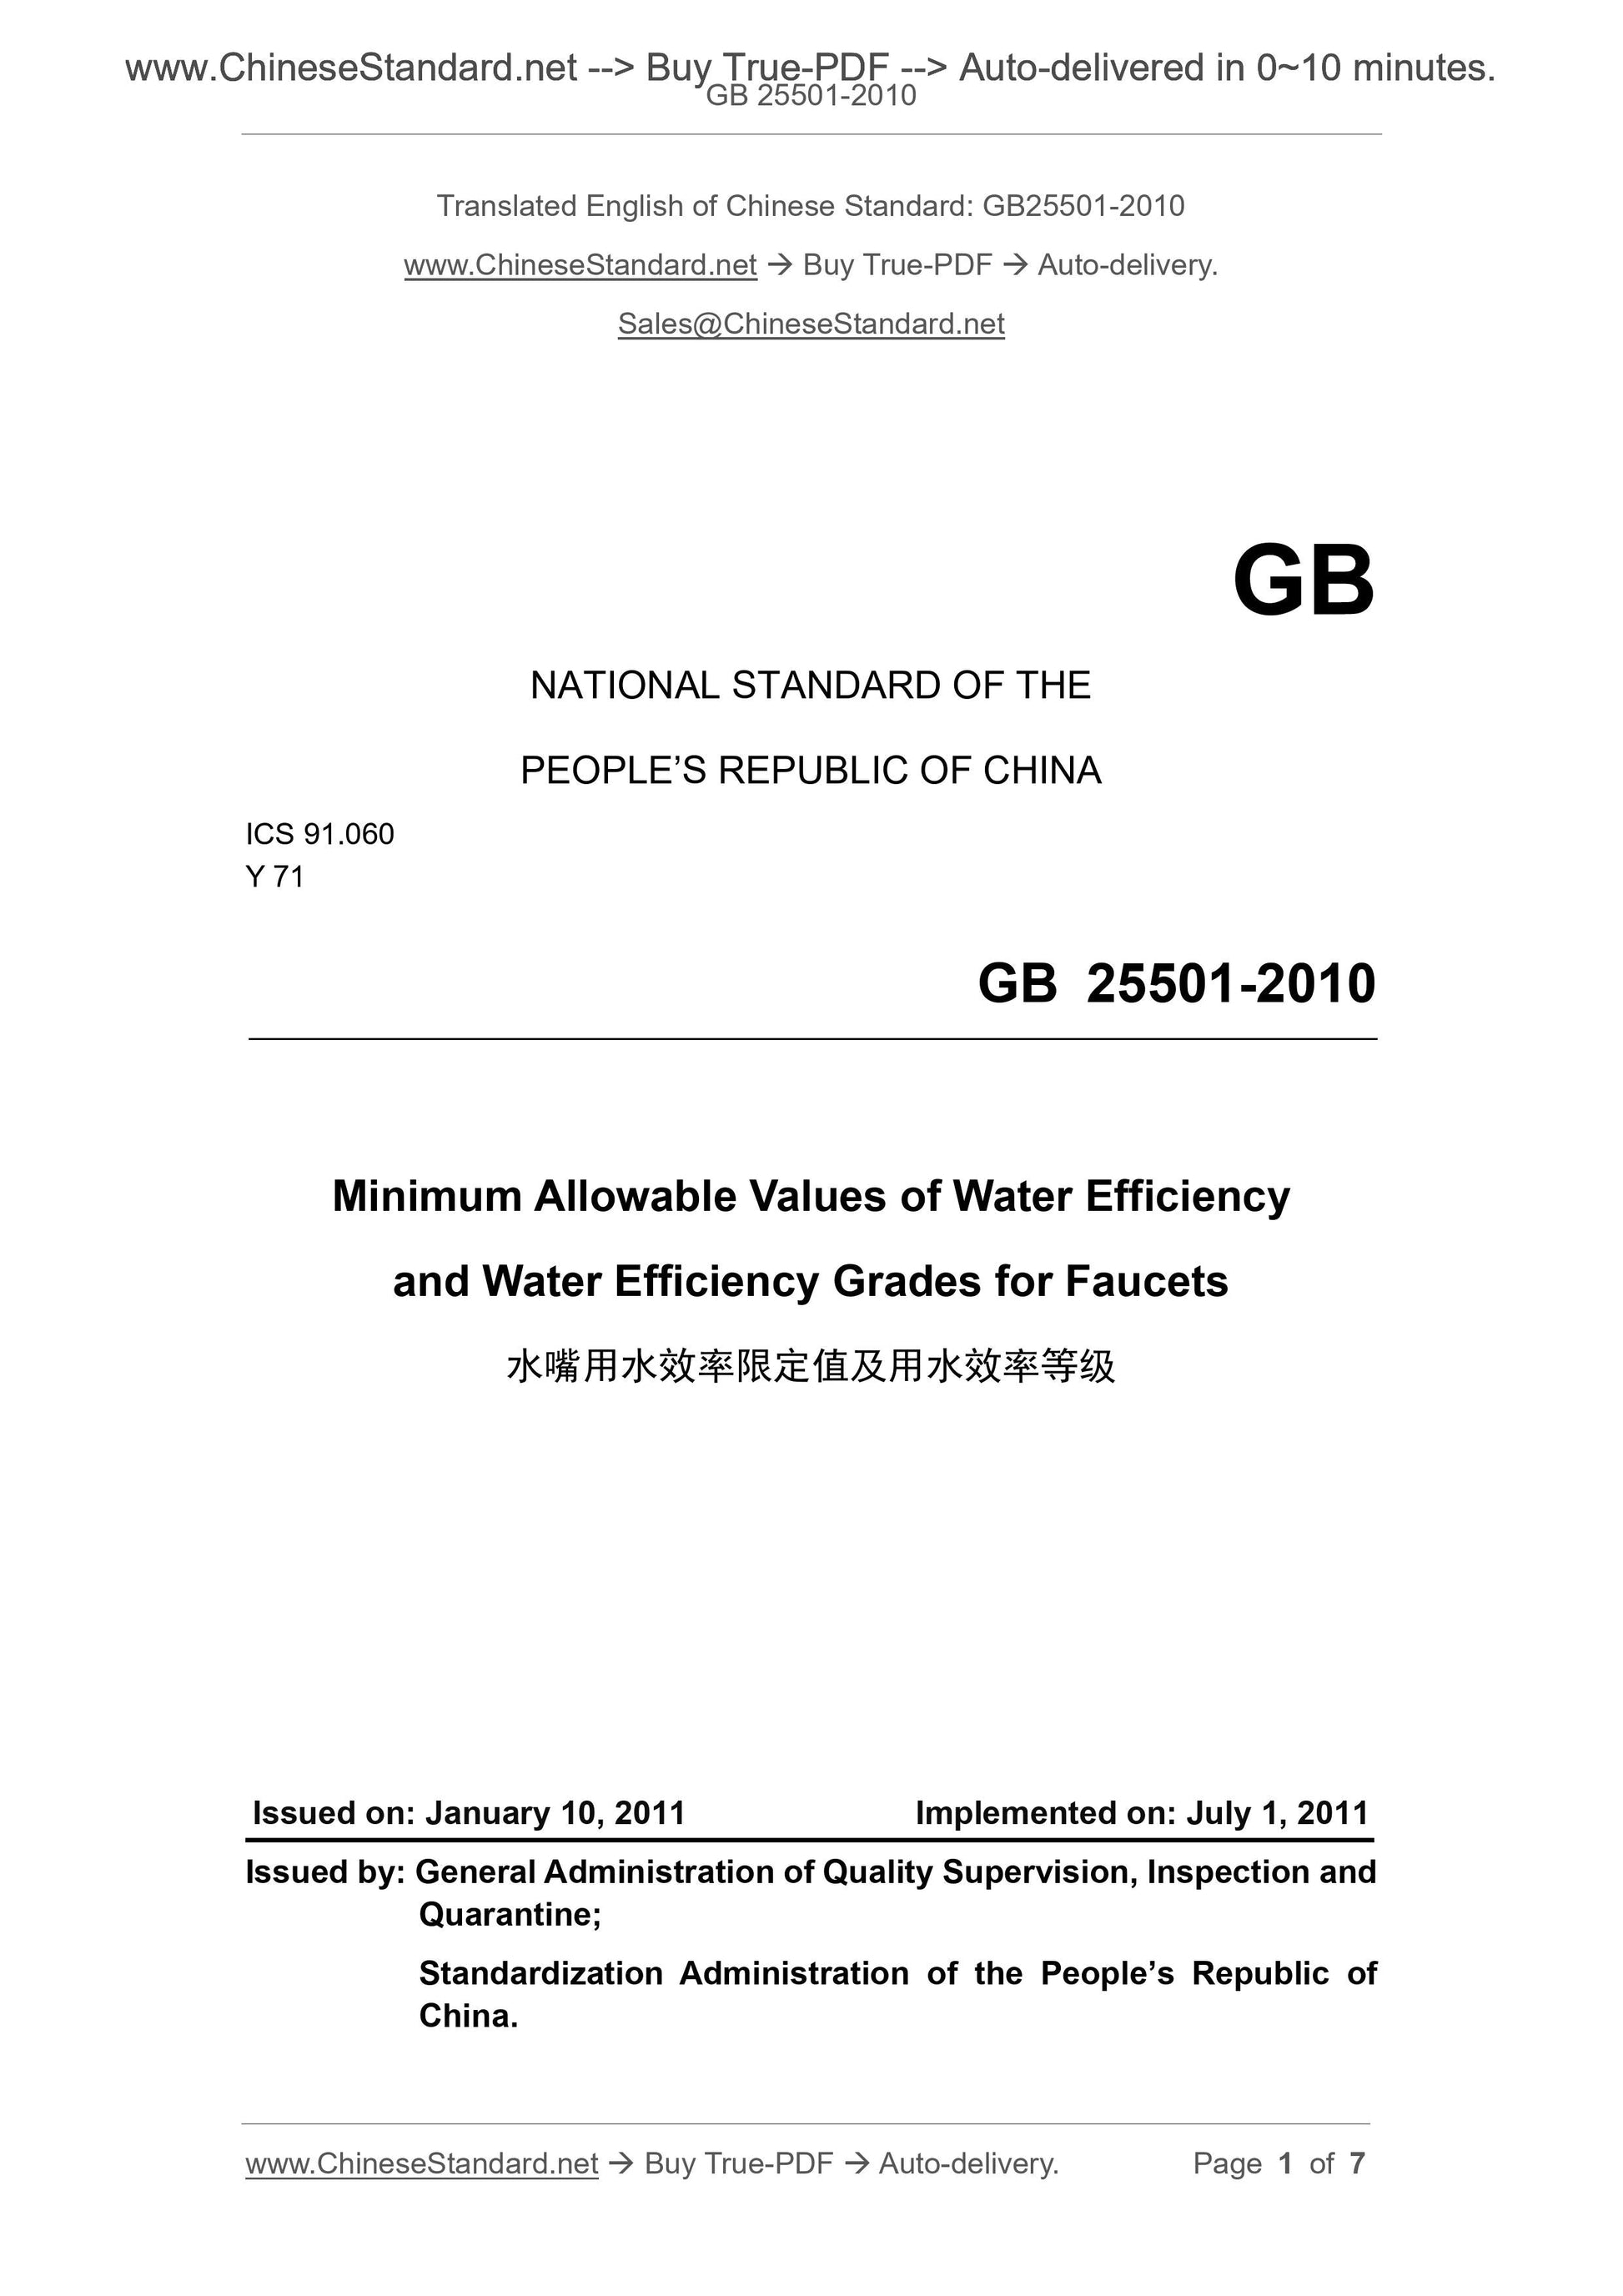 GB 25501-2010 Page 1